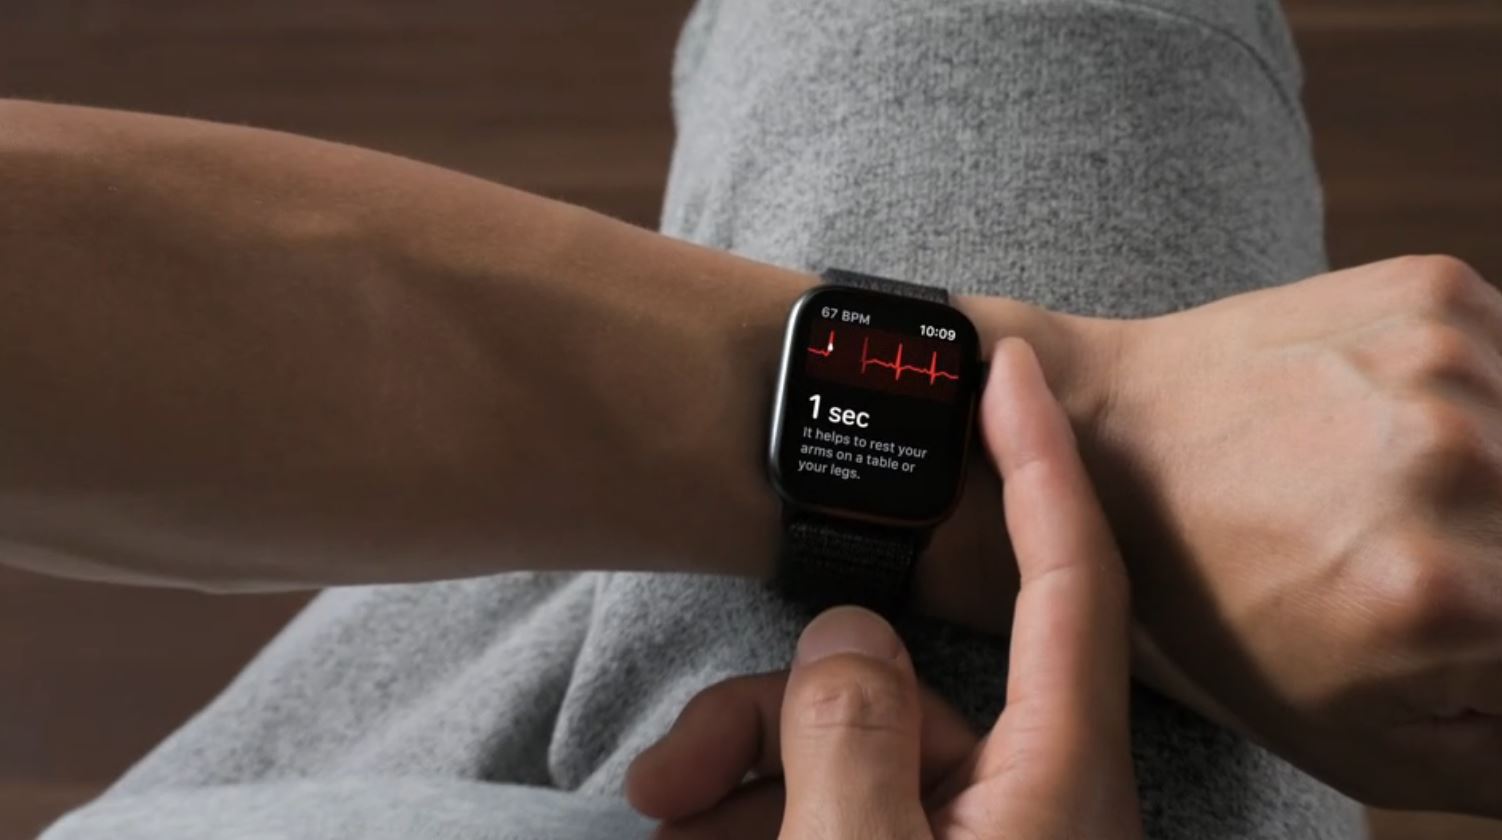 Apple Watch ECG is now available in India; in Brazil, no sign of him